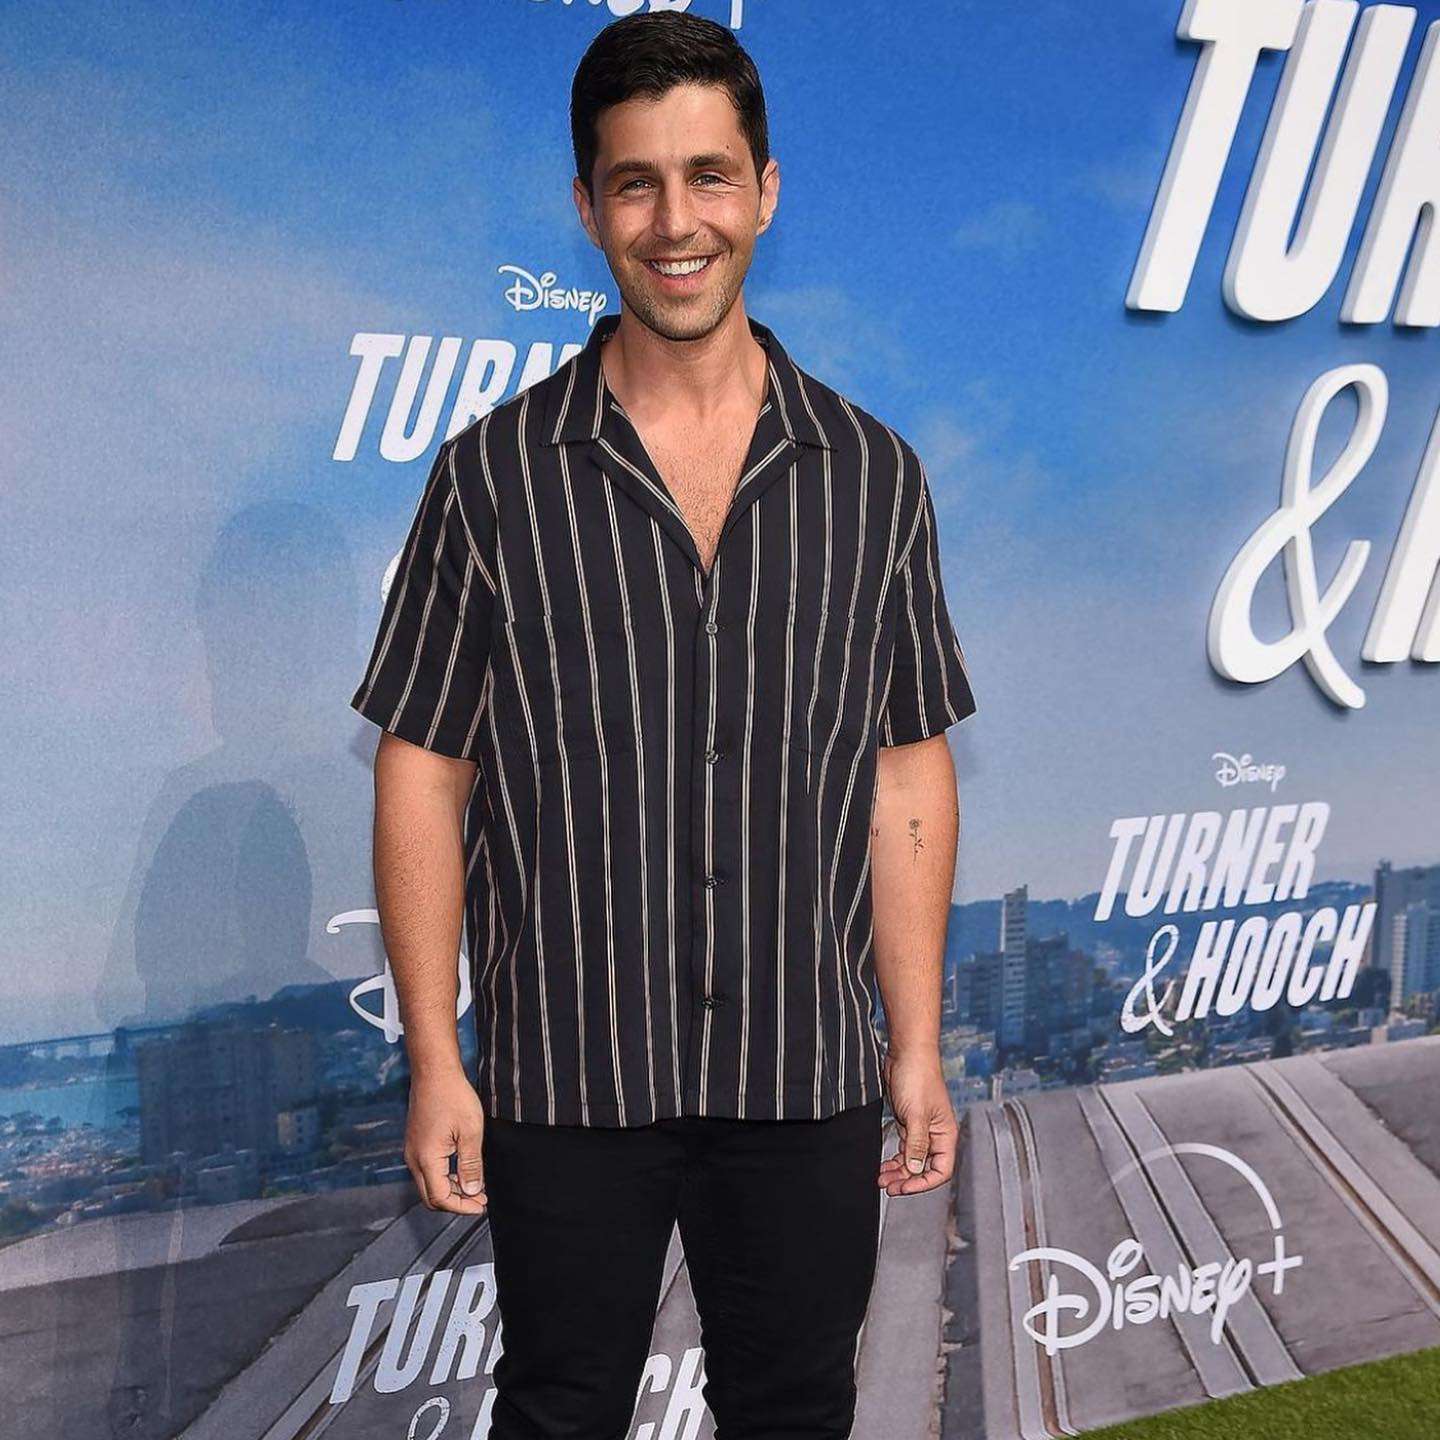 Josh Peck image from movie promotion